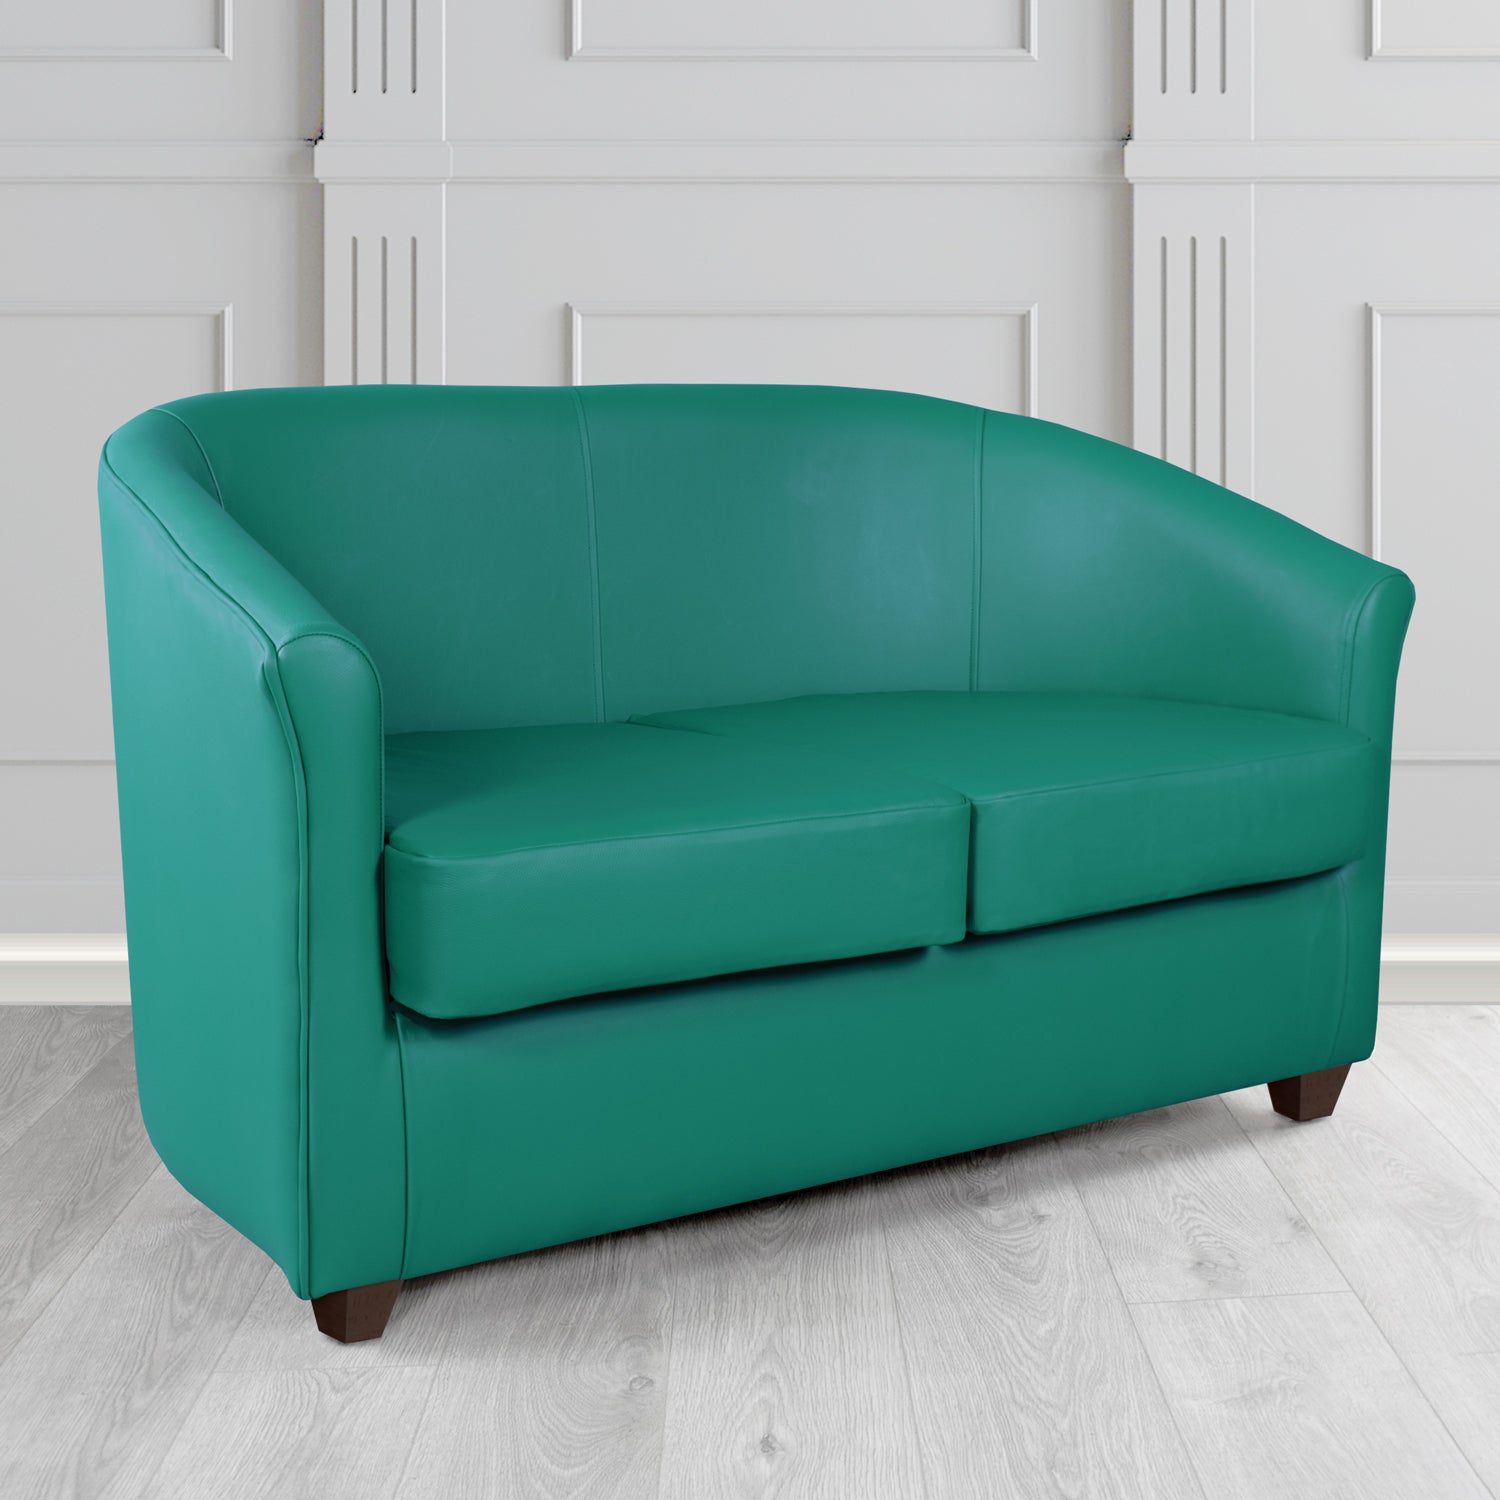 Cannes 2 Seater Tub Sofa in Just Colour Teal Crib 5 Faux Leather - The Tub Chair Shop